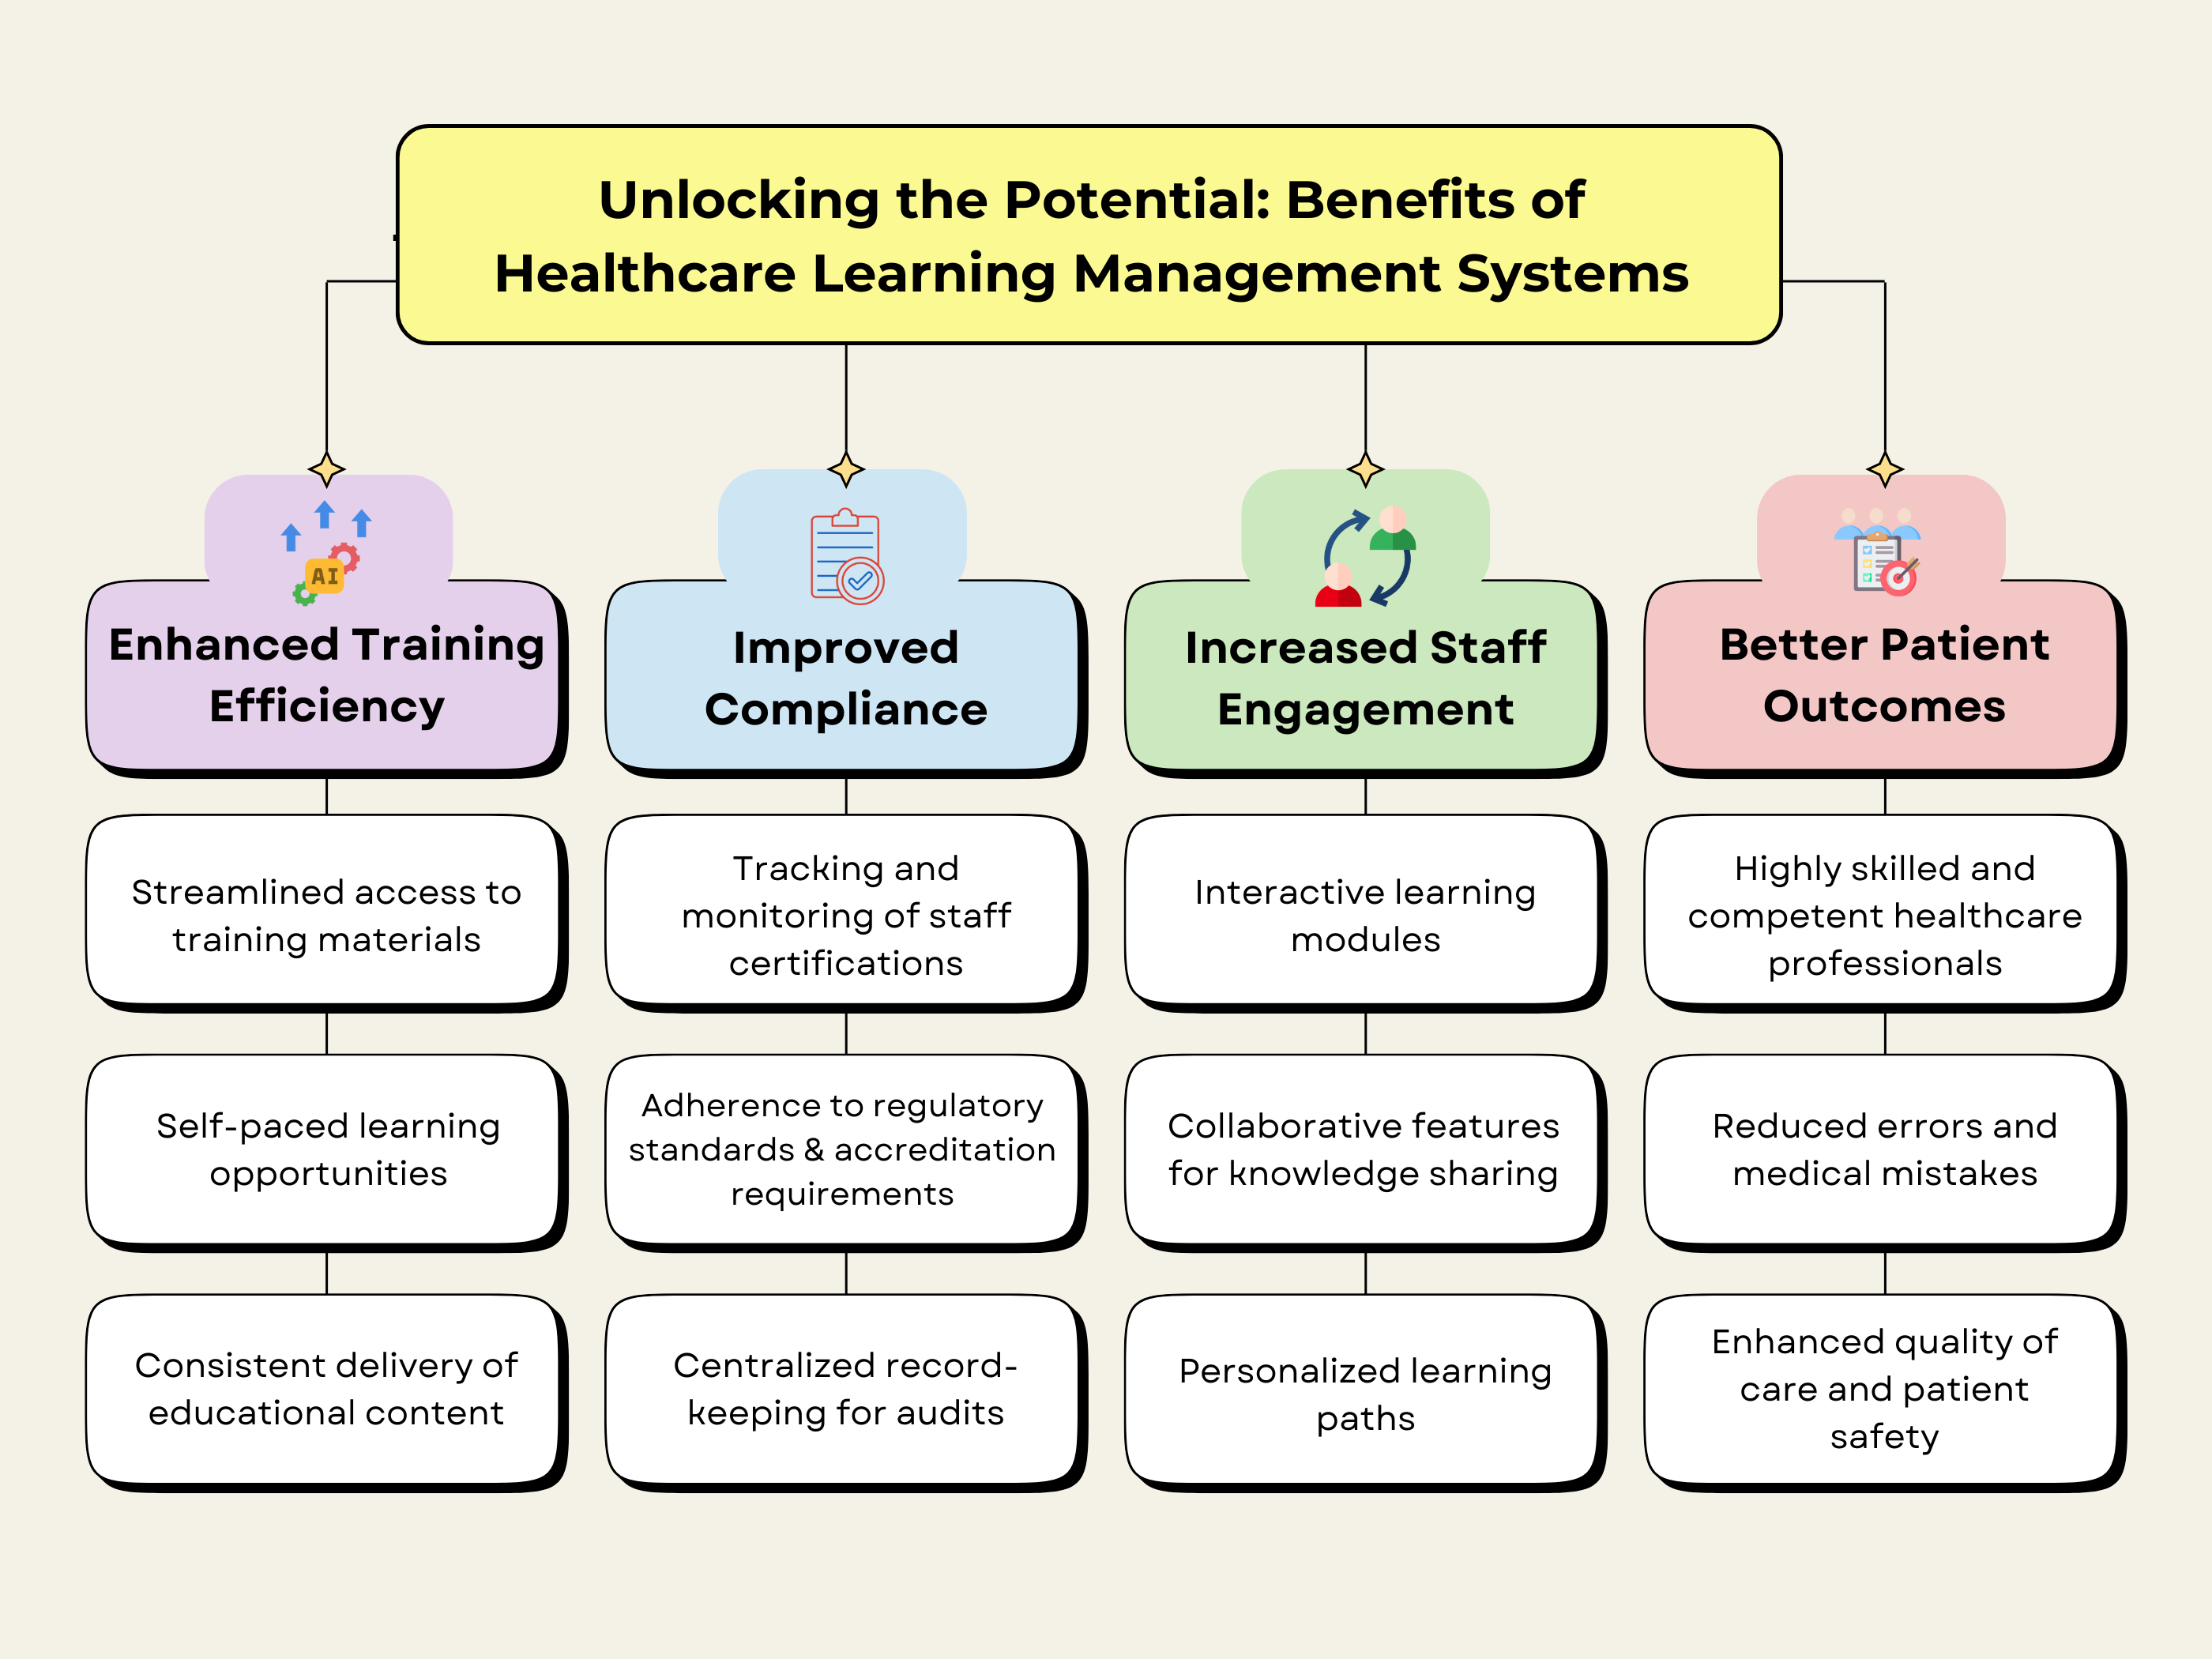 Unlocking the Potential_ Benefits of Healthcare Learning Management Systems